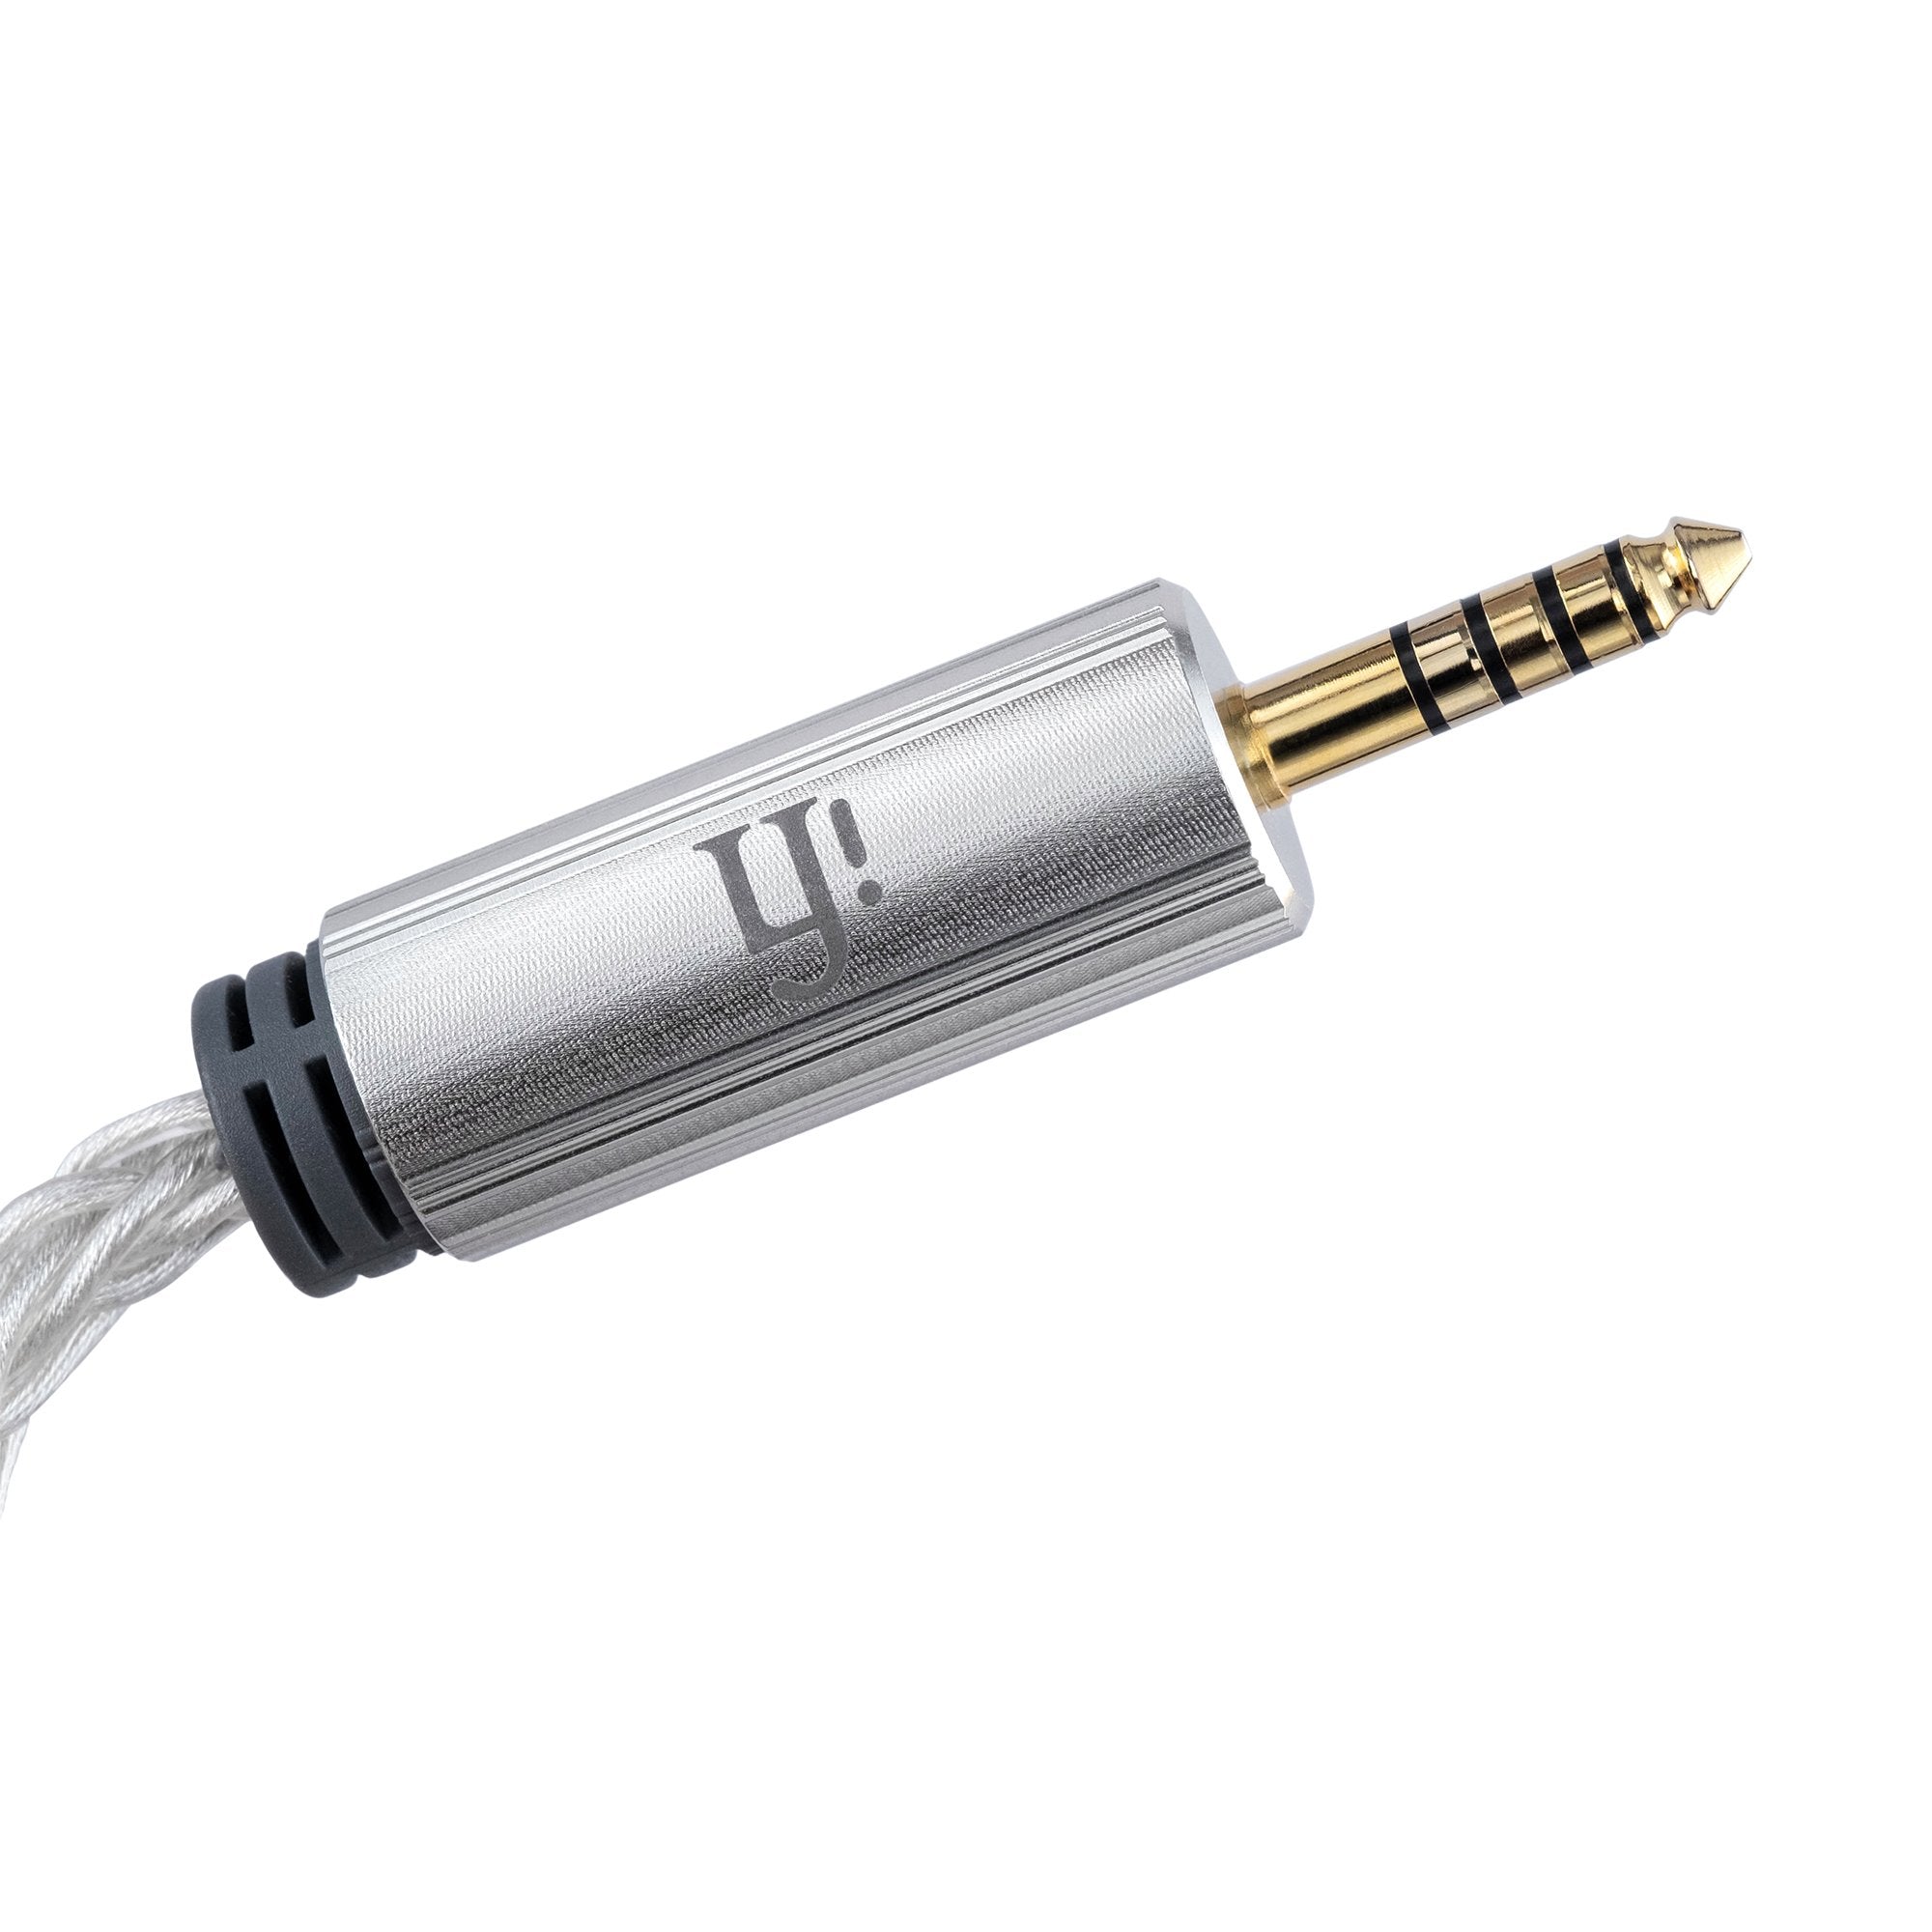 iFi-Audio 4.4mm to 4.4mm cable - ケーブル